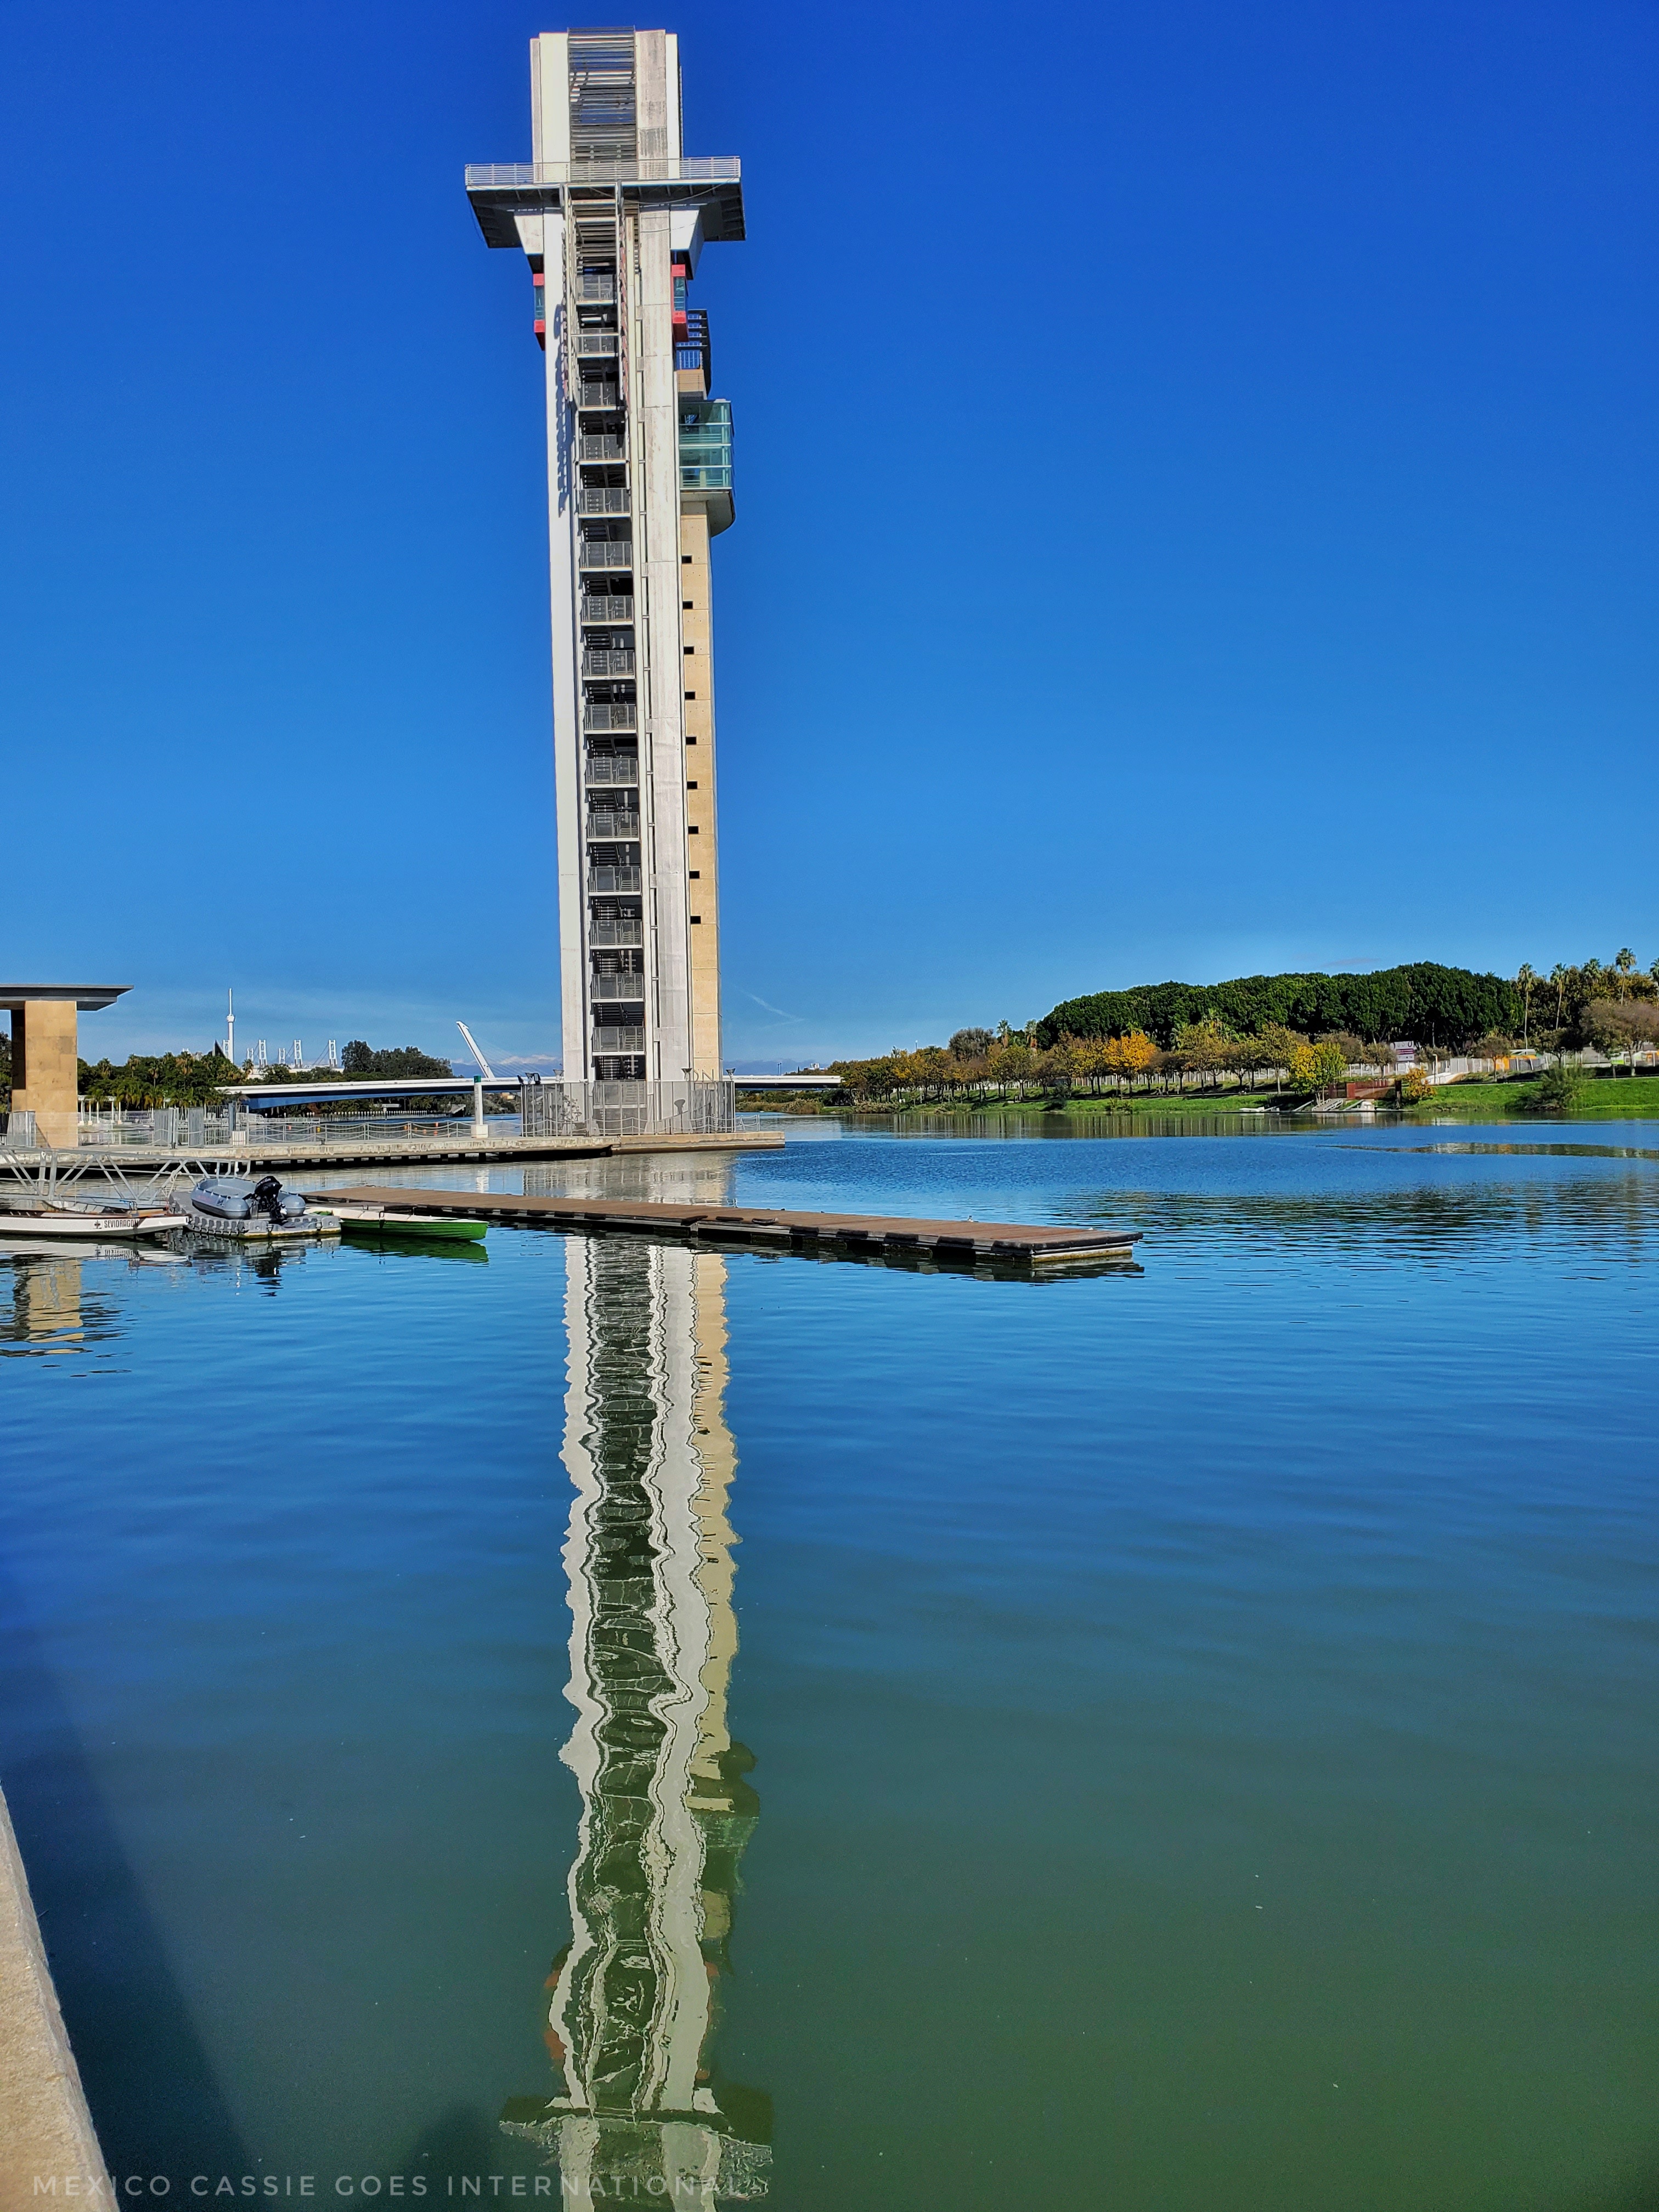 Torre Schindler (Sevilla tower) against blue sky. Reflected into water below